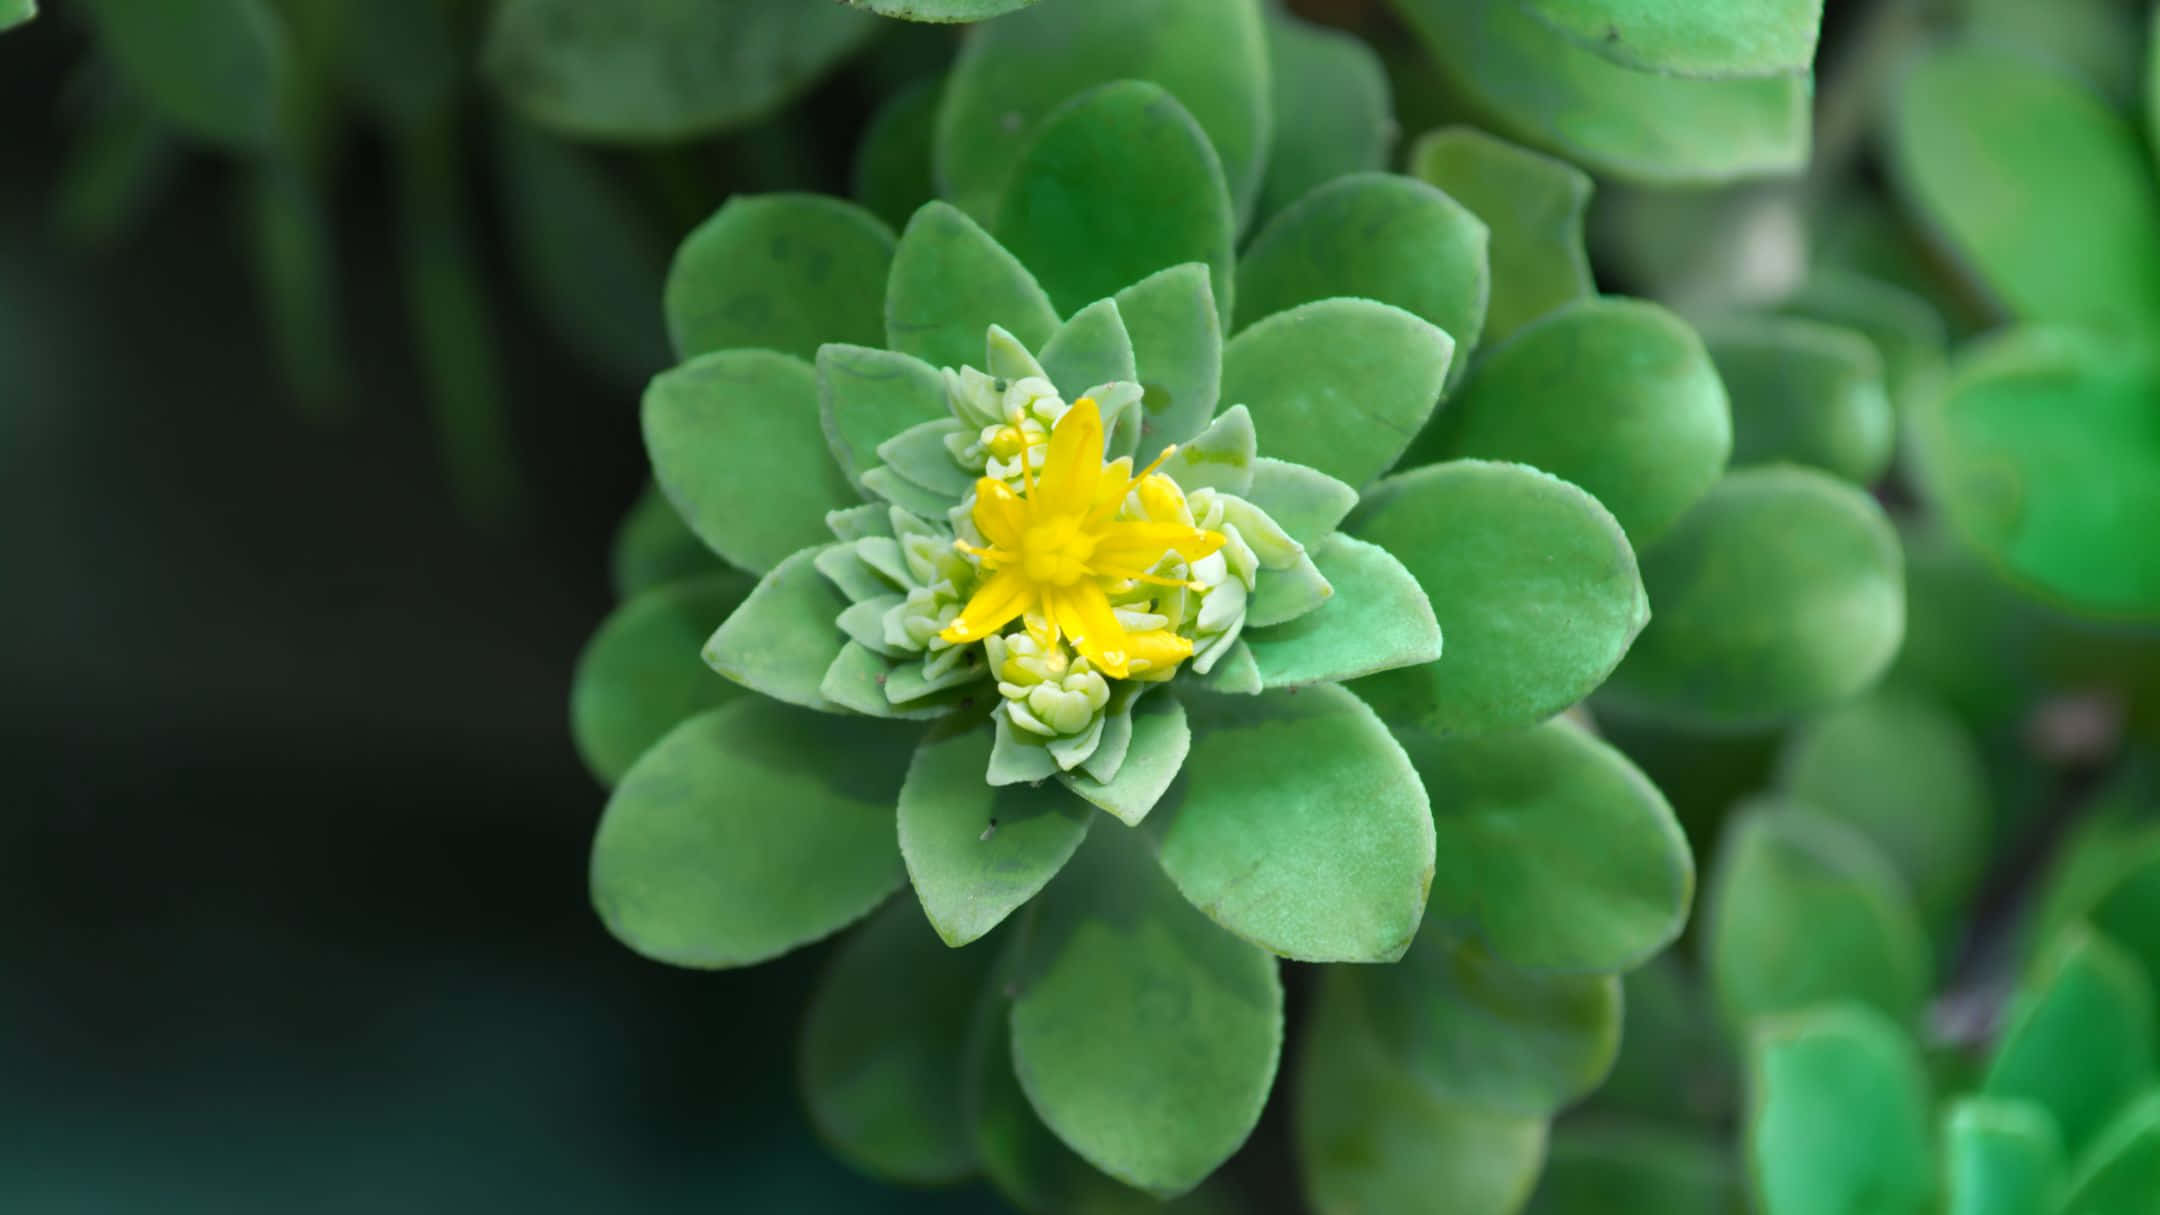 A Close Up Of A Green Flower With Yellow Flowers